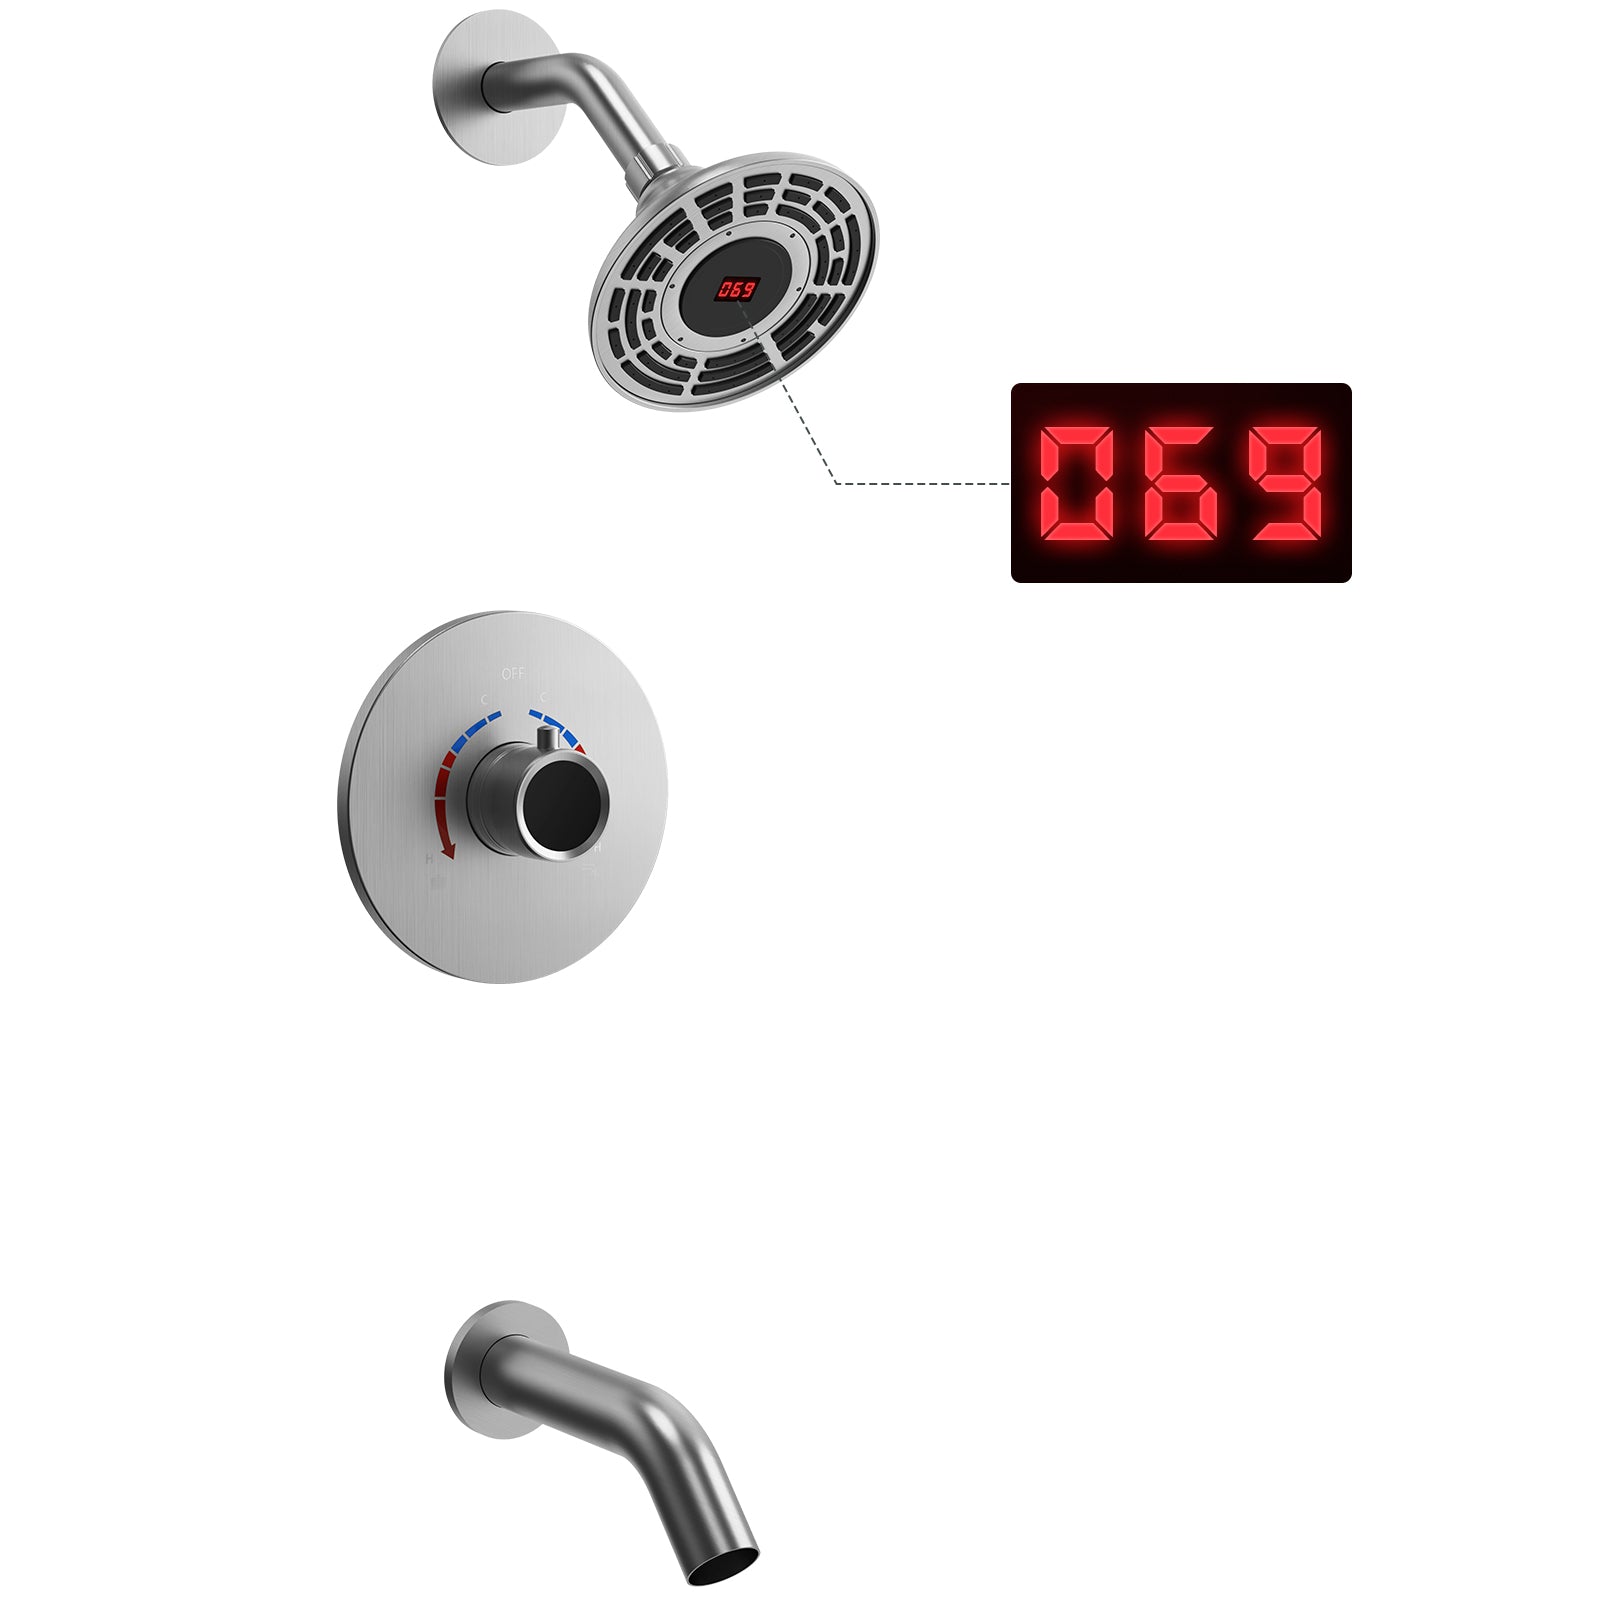 SFS-1018-NK5 EVERSTEIN Digital display constant temperature shower faucet with rough valve in Brushed Nickel